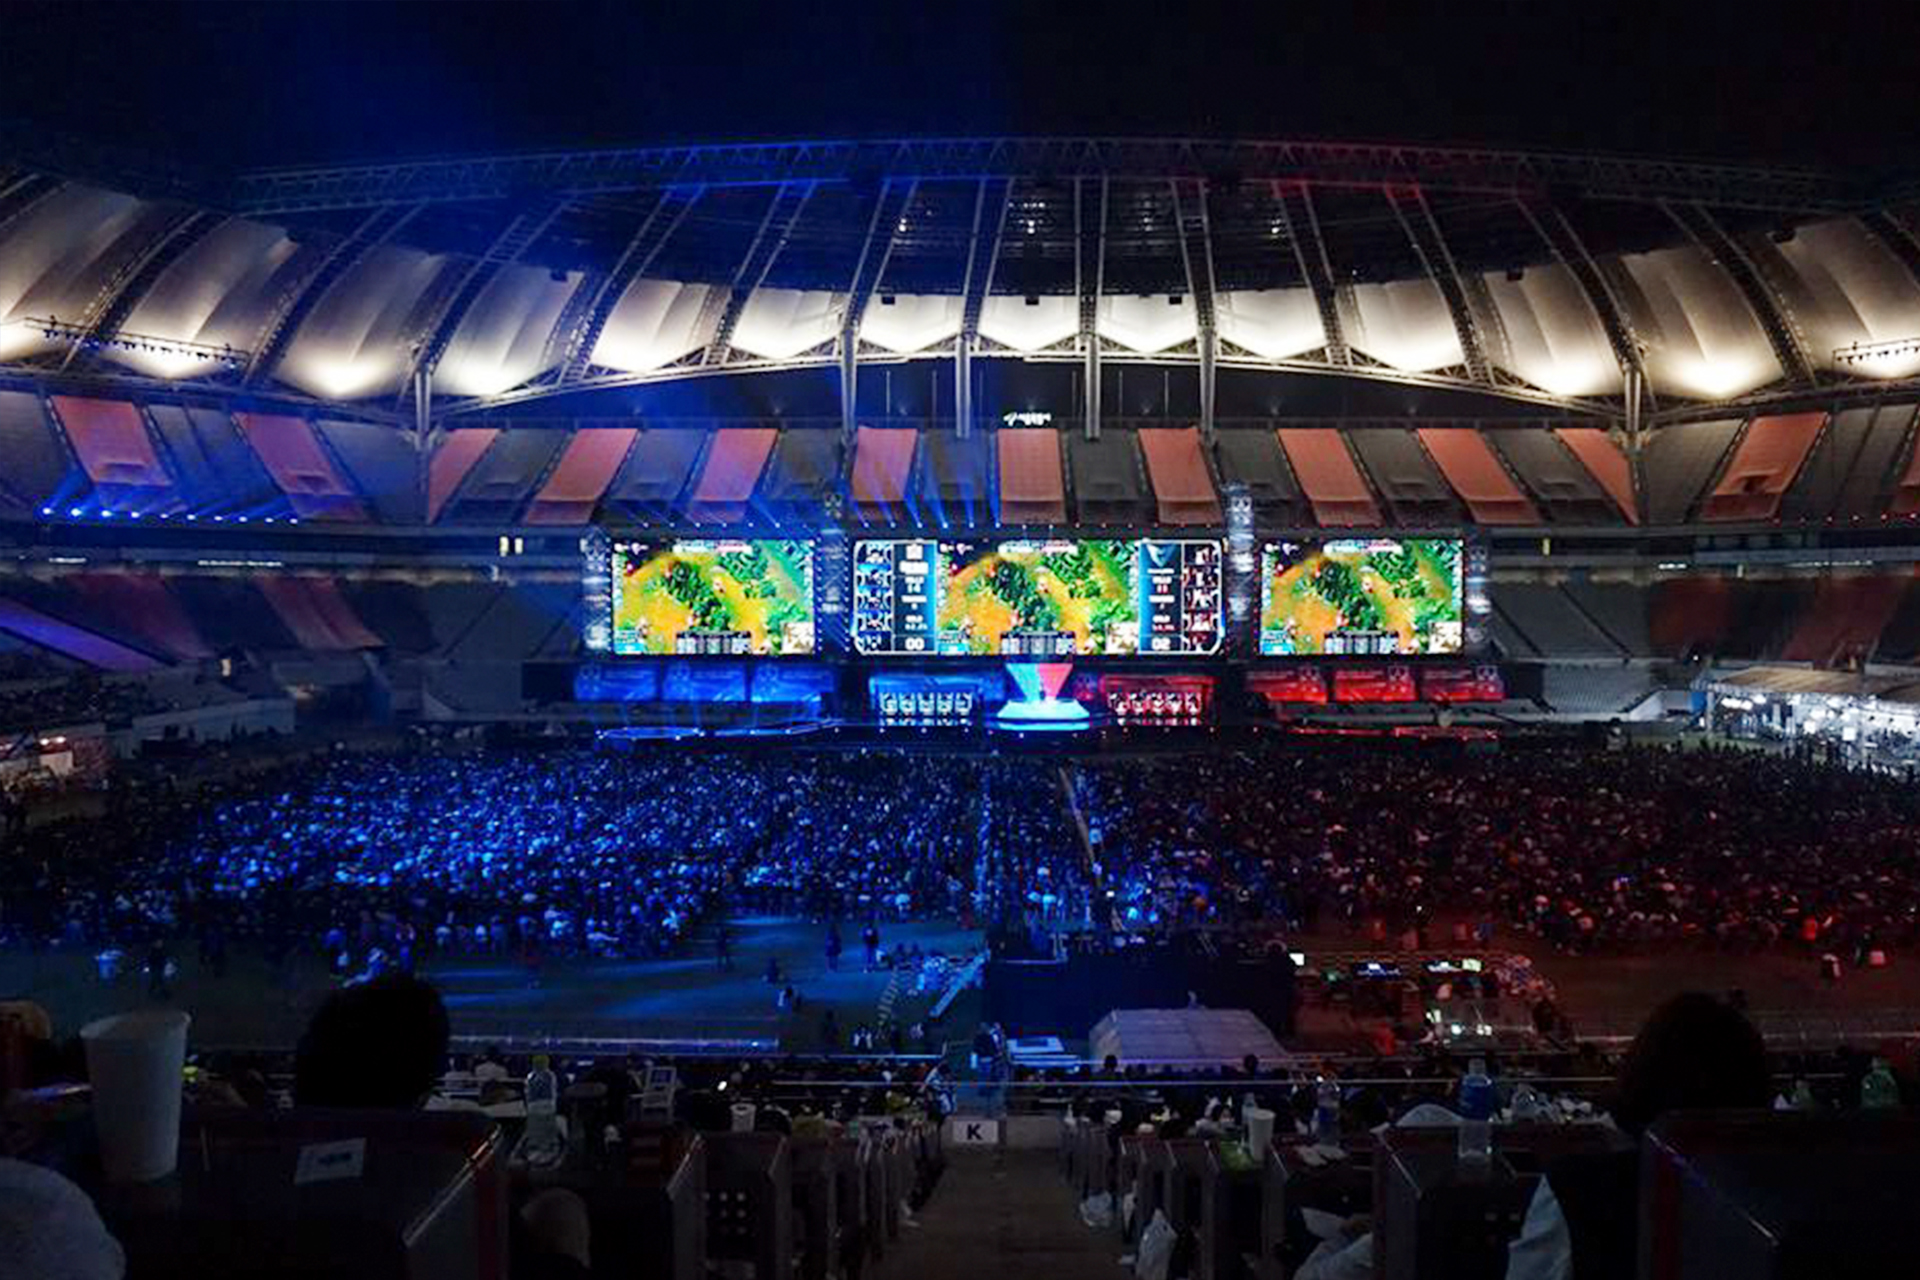 Full Opening Ceremony of League of Legends Season 4 World Championship 2014  in Seoul, South Korea! 